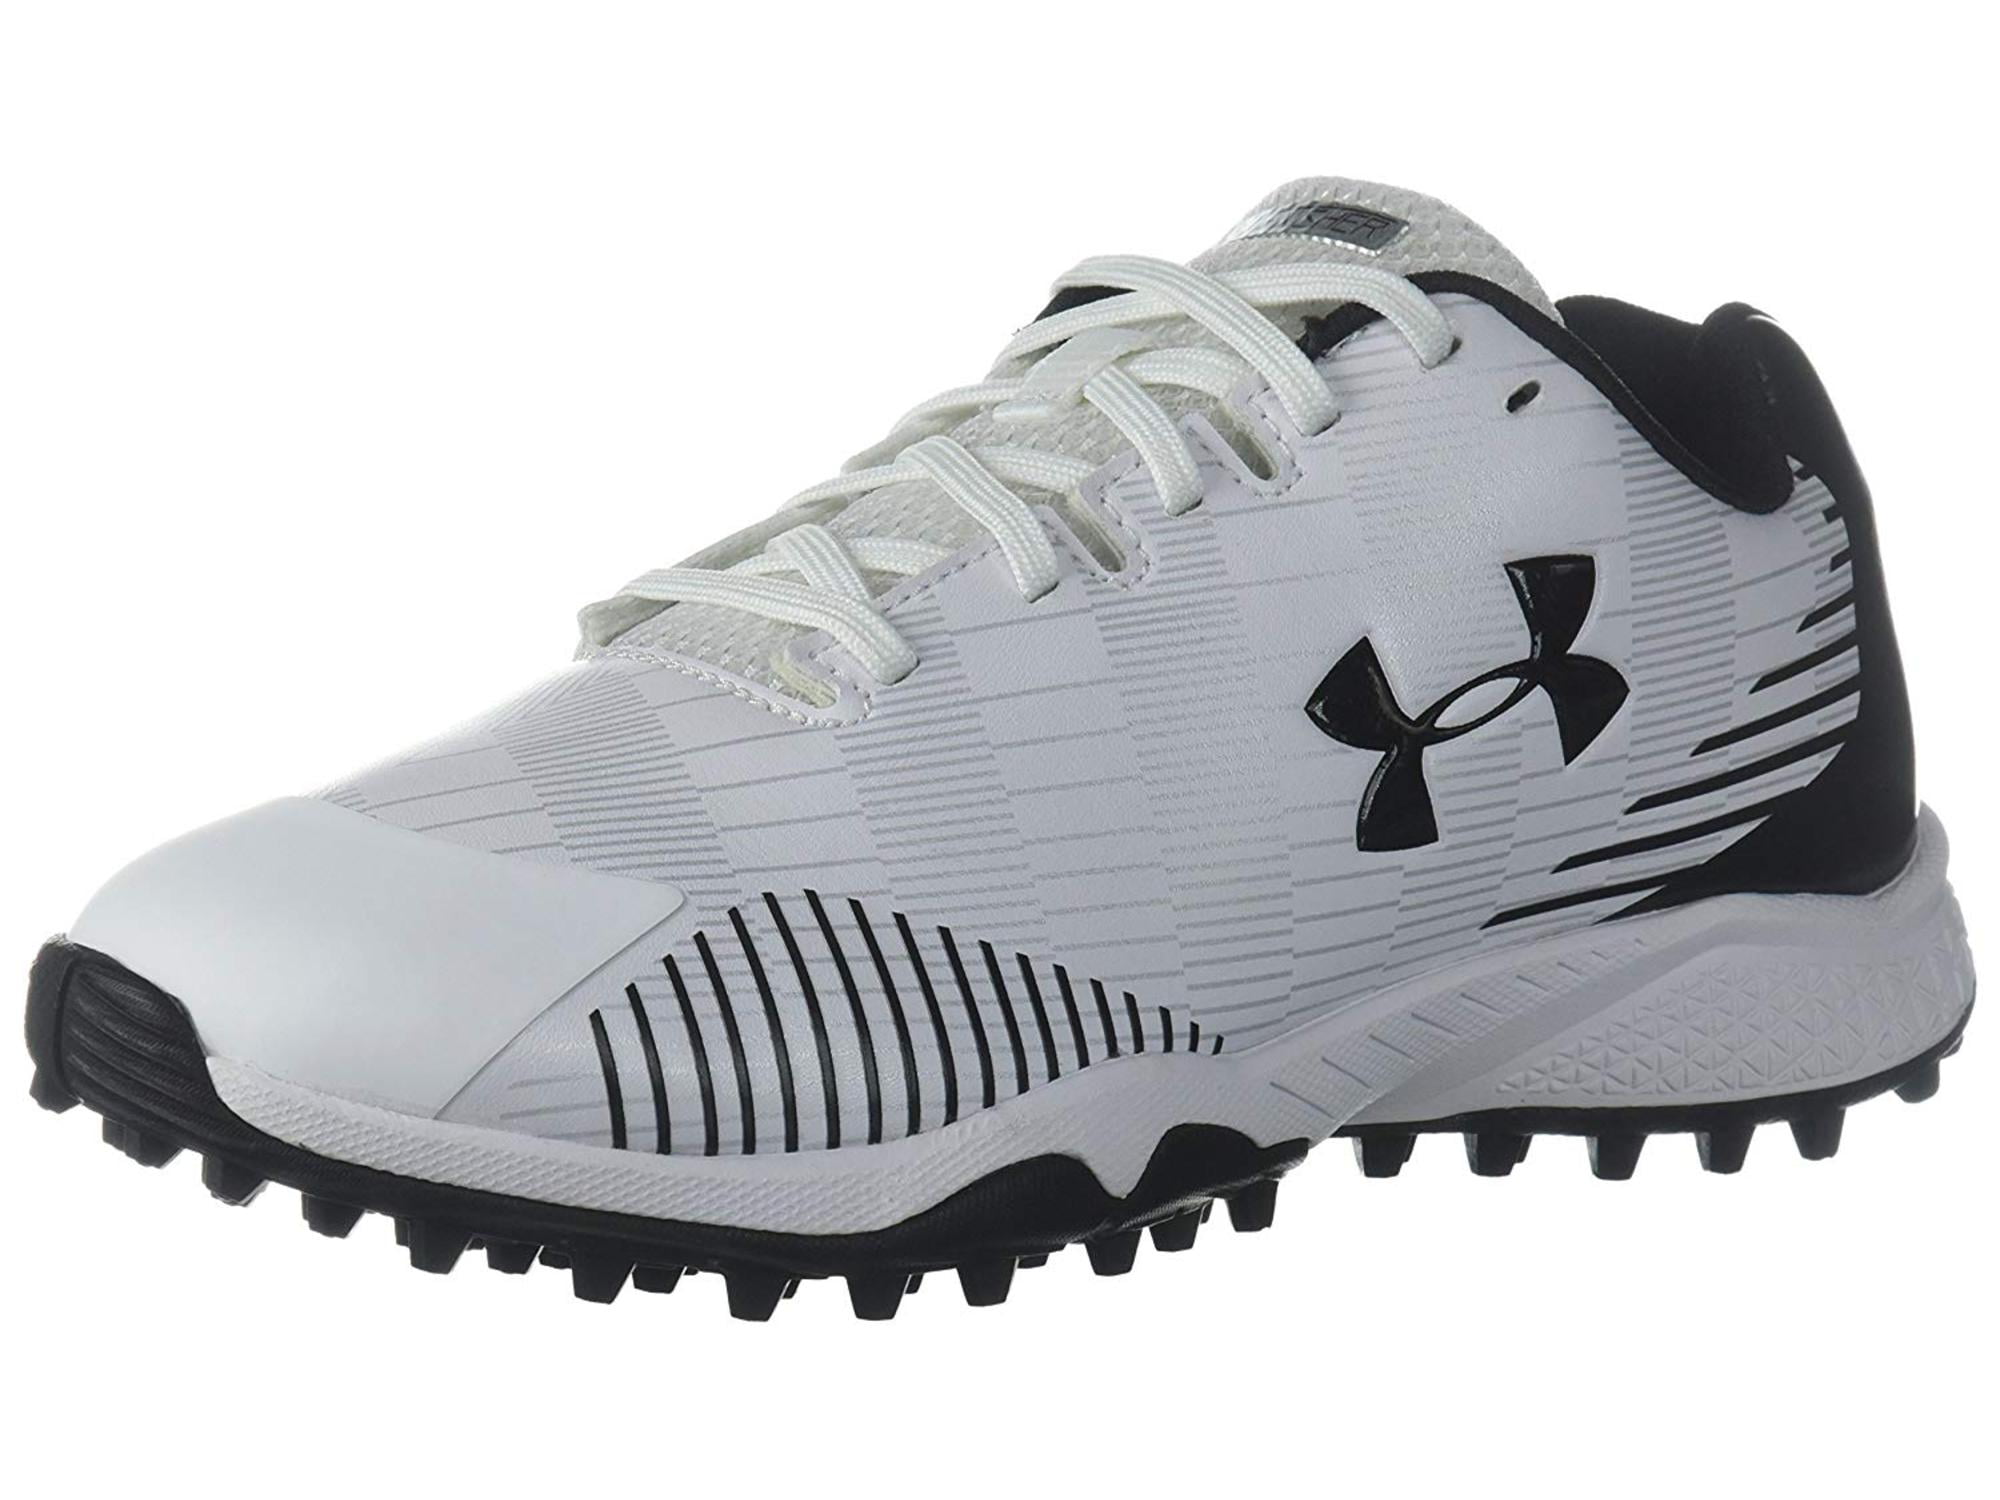 Neuf Under Armour team Women's Lacrosse Finisher Turf 9.0 Taille Crampons 